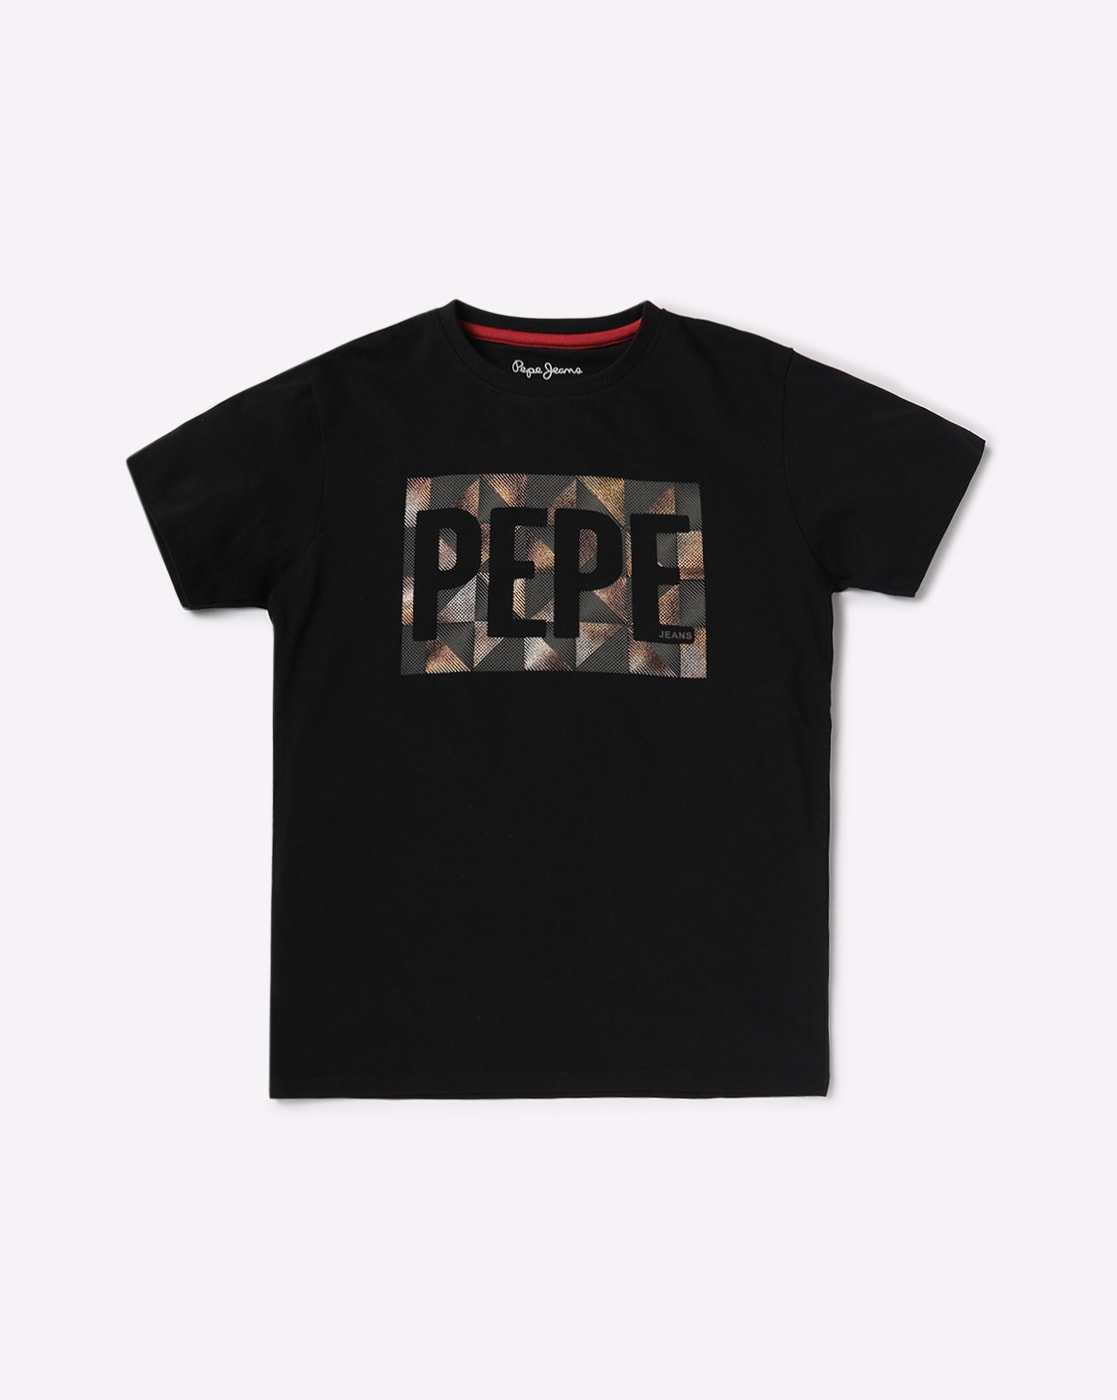 Pepe Jeans Black Shirts - Buy Pepe Jeans Black Shirts online in India